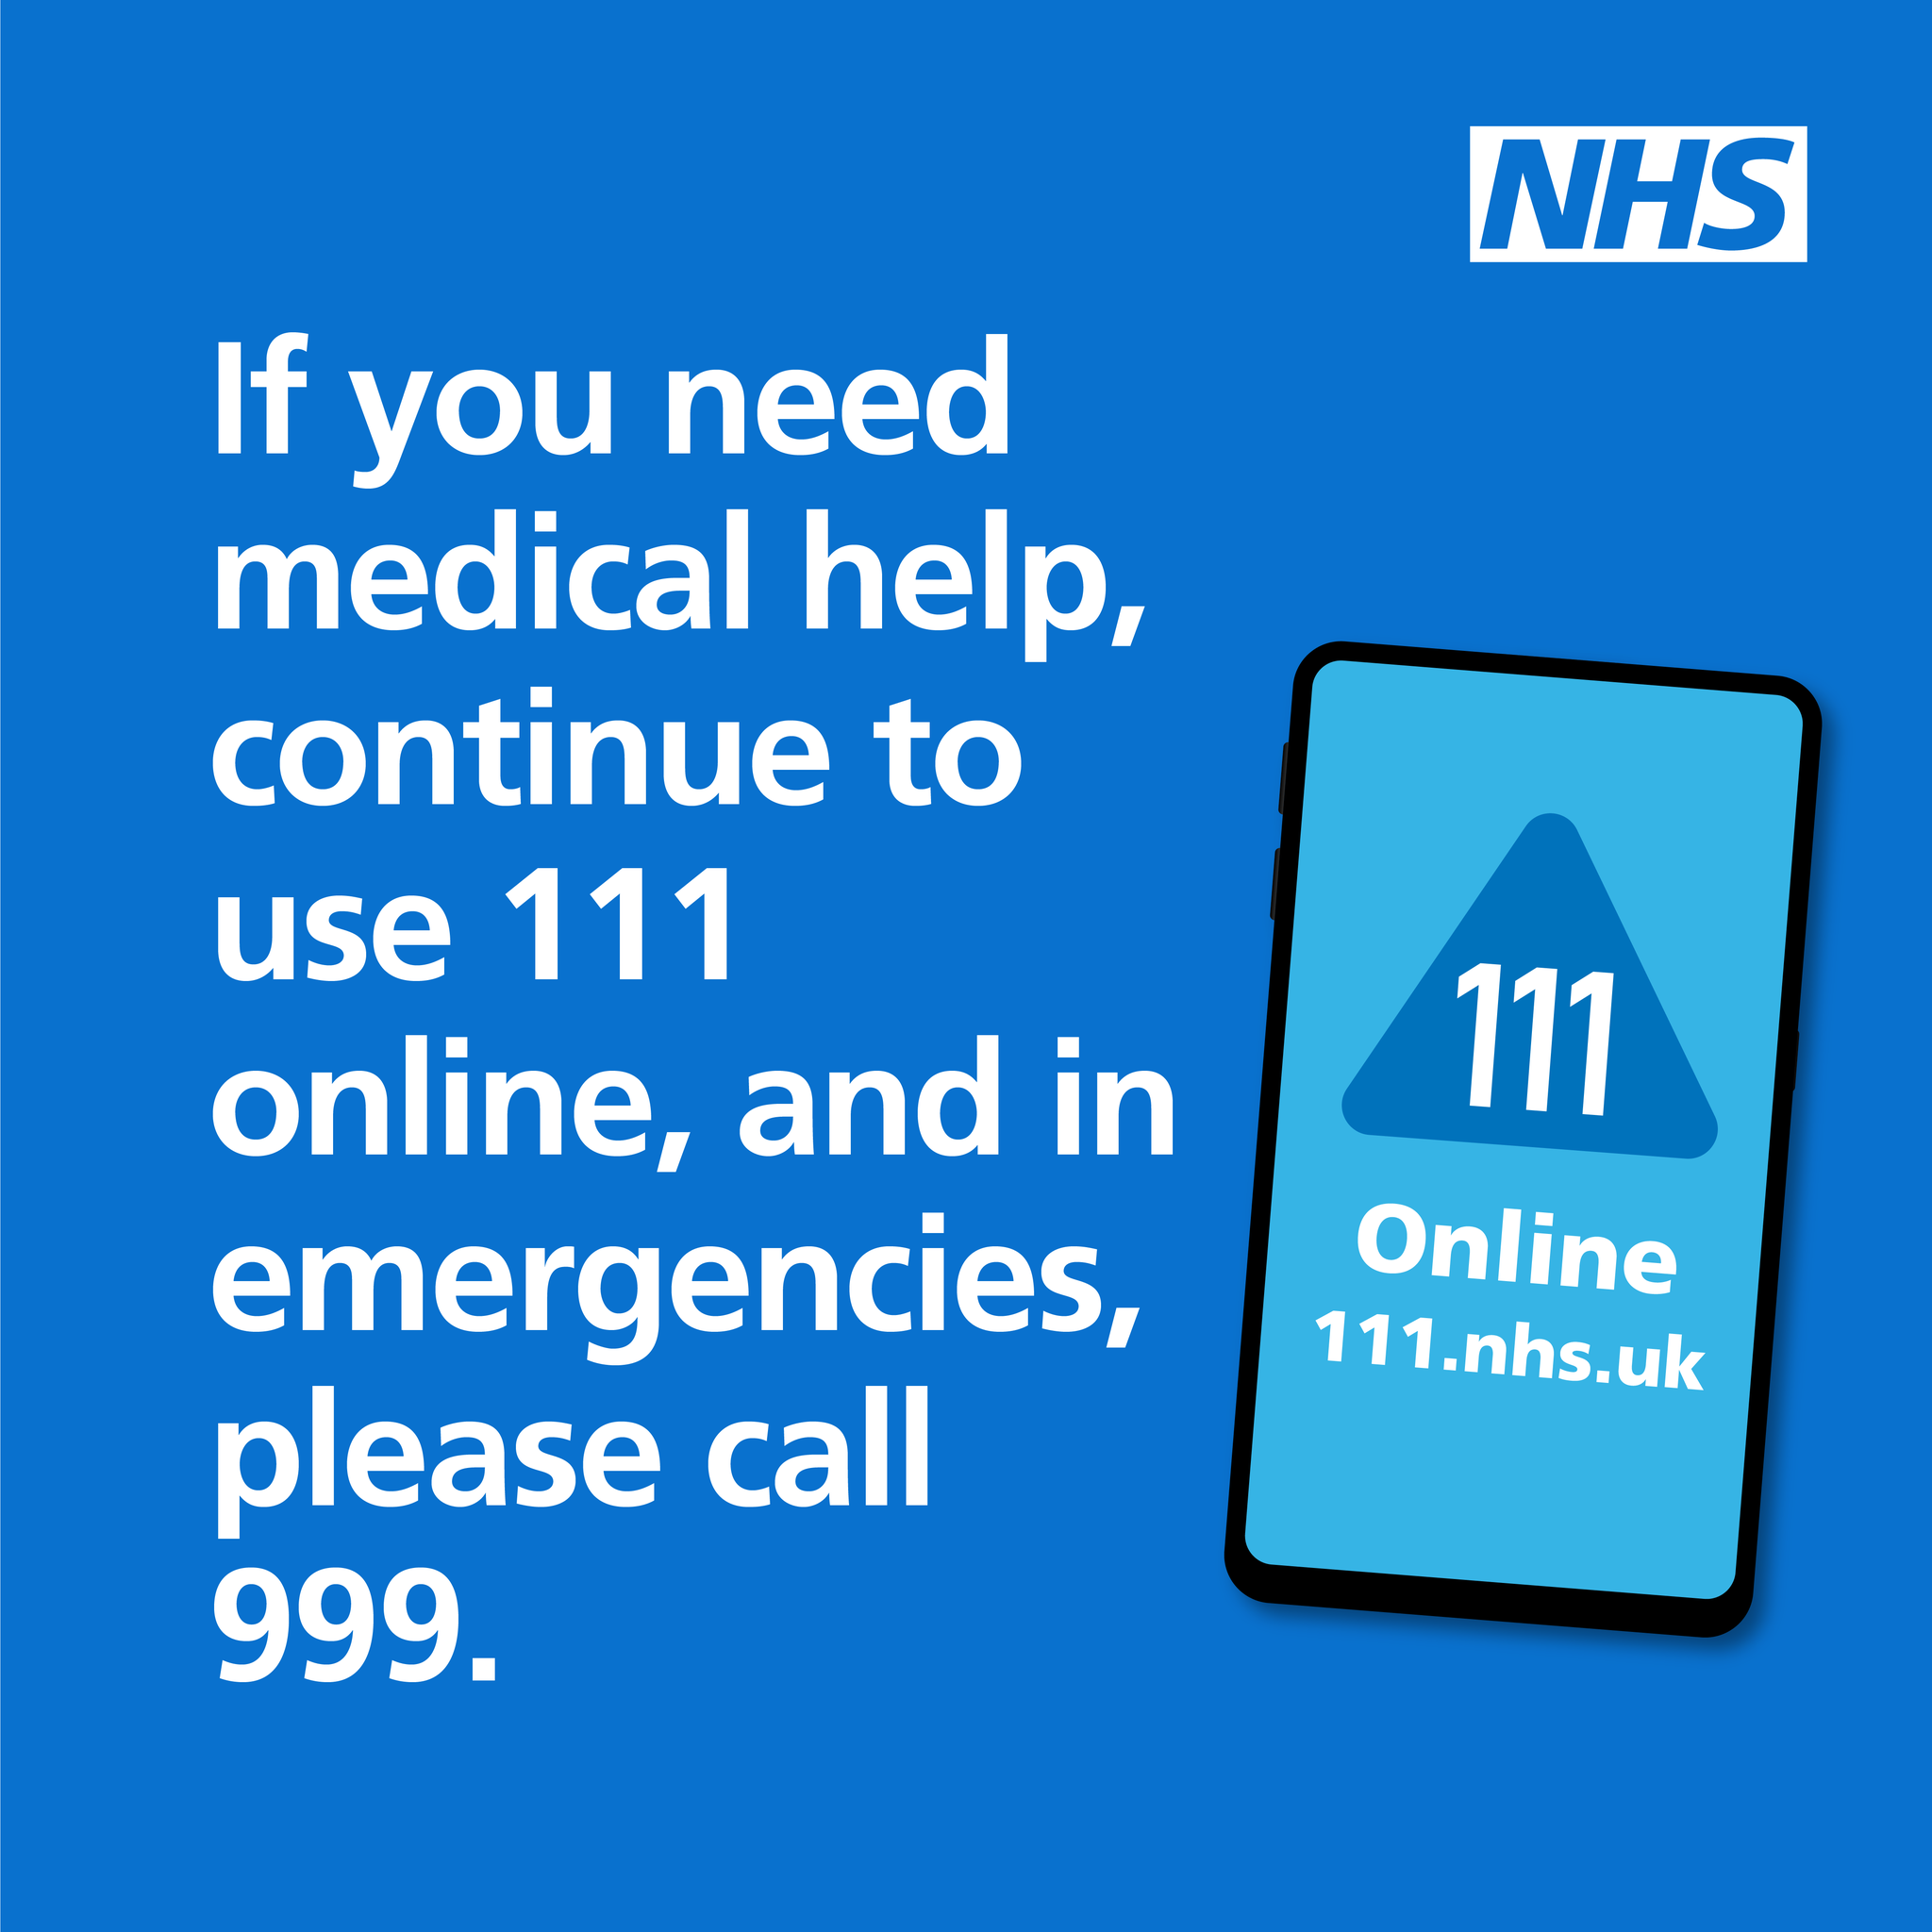 Image advising people to call 999 in an emergency